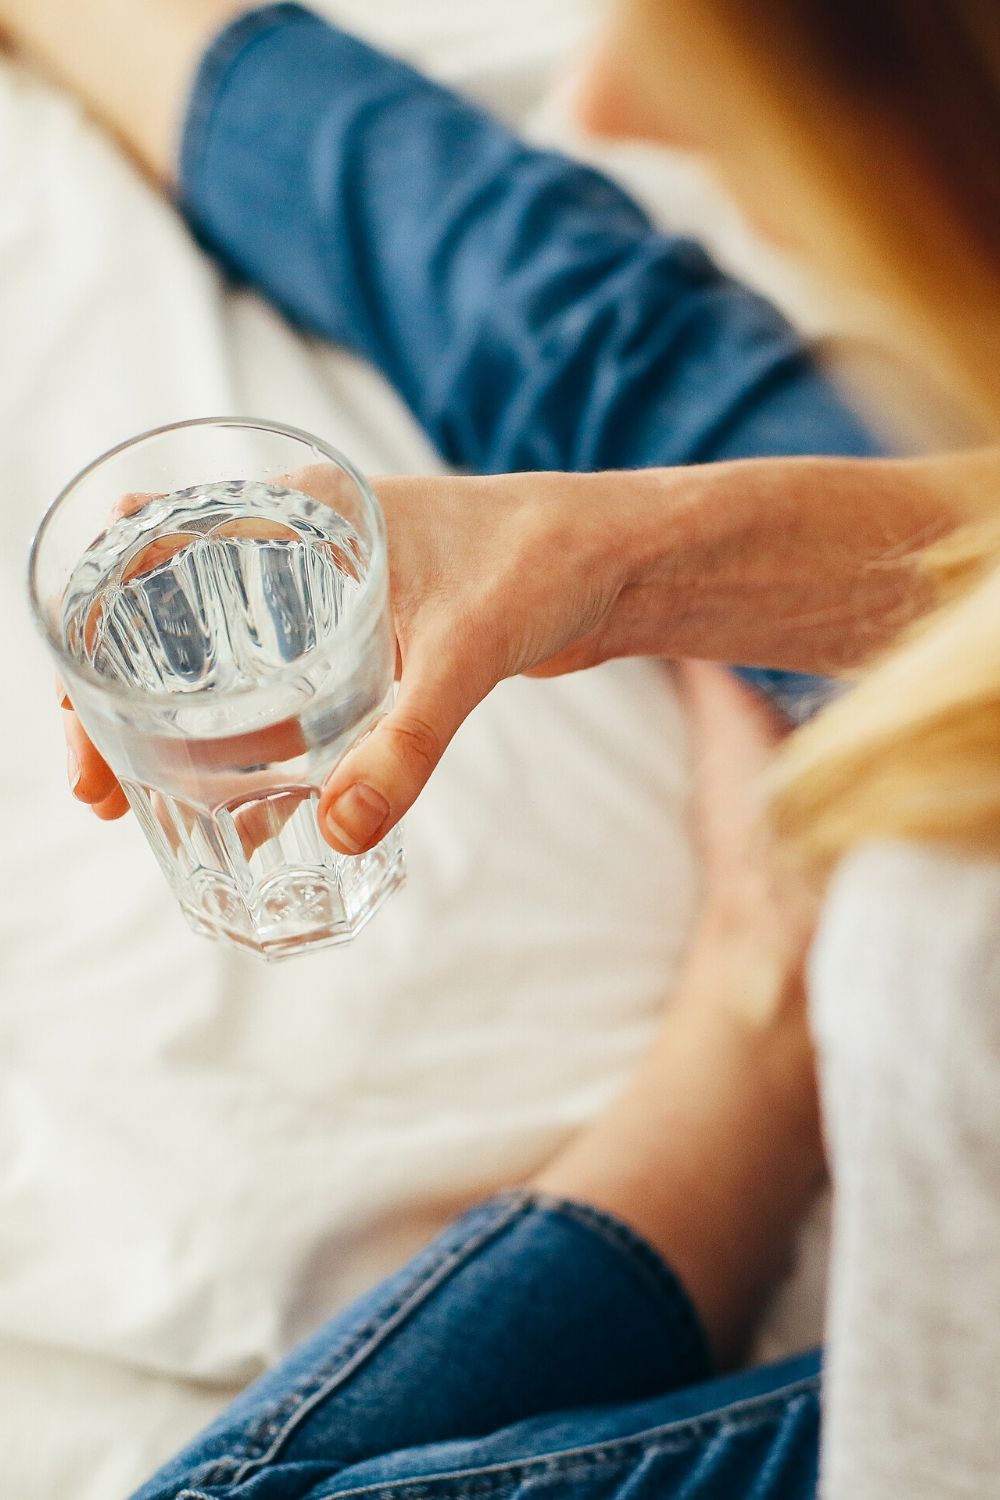 Can drinking more water help clear up your skin